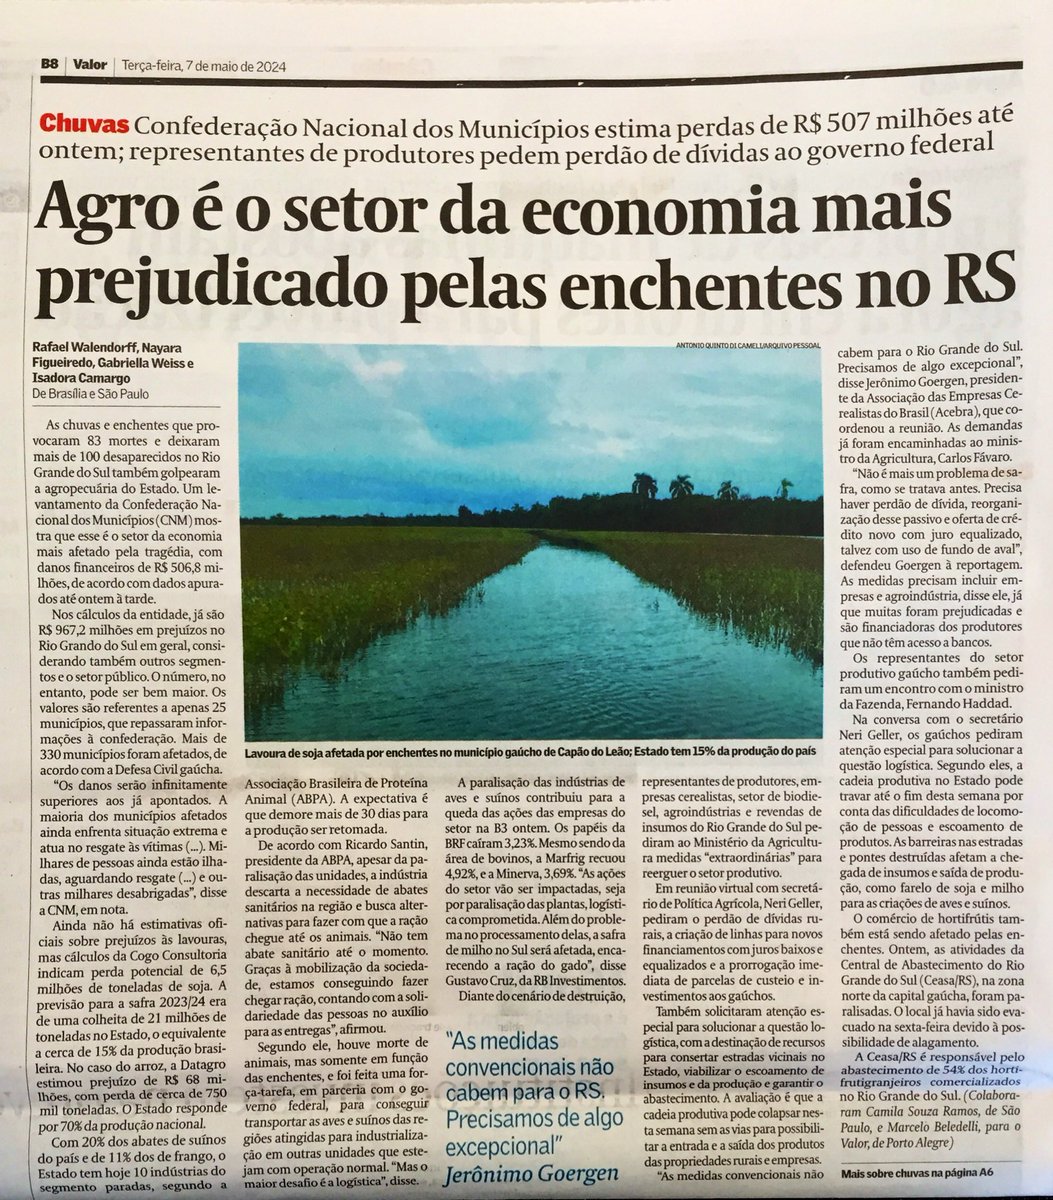 Valor: Agriculture worst hit by extreme floods in 🇧🇷 Rio Grande do Sul. Southern state accounts for staggering 70% of national rice production.Estimated 750k tons of rice lost, roughly 10% of state’s annual output. Some 6.5mn tons of soybeans thought lost out of 21mn tons harvest